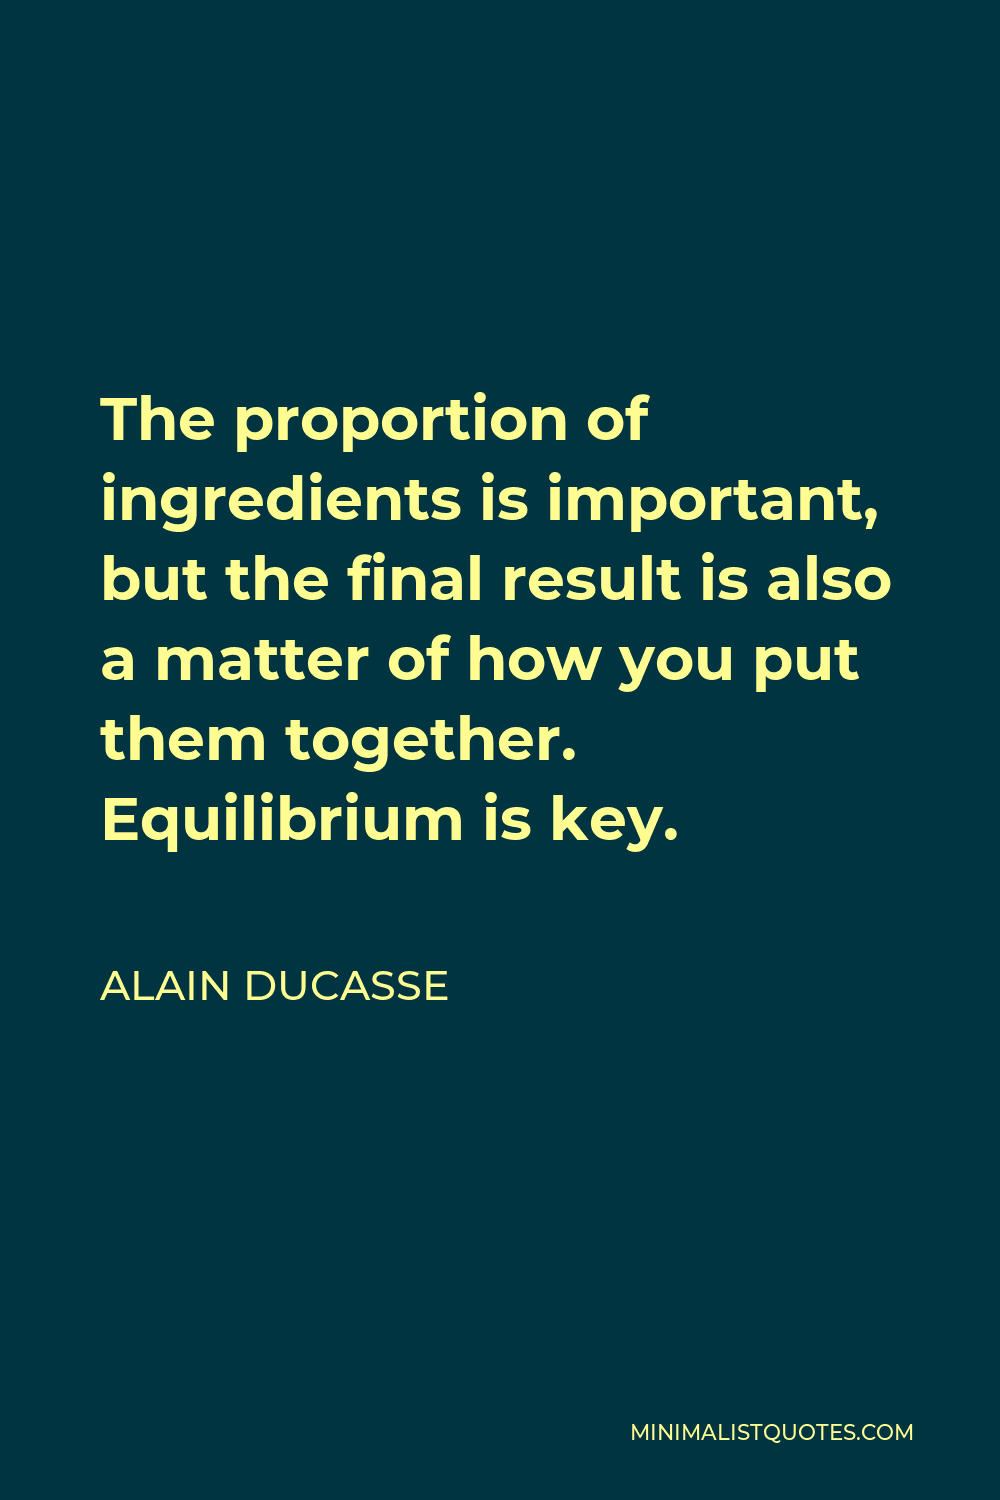 Alain Ducasse Quote - The proportion of ingredients is important, but the final result is also a matter of how you put them together. Equilibrium is key.